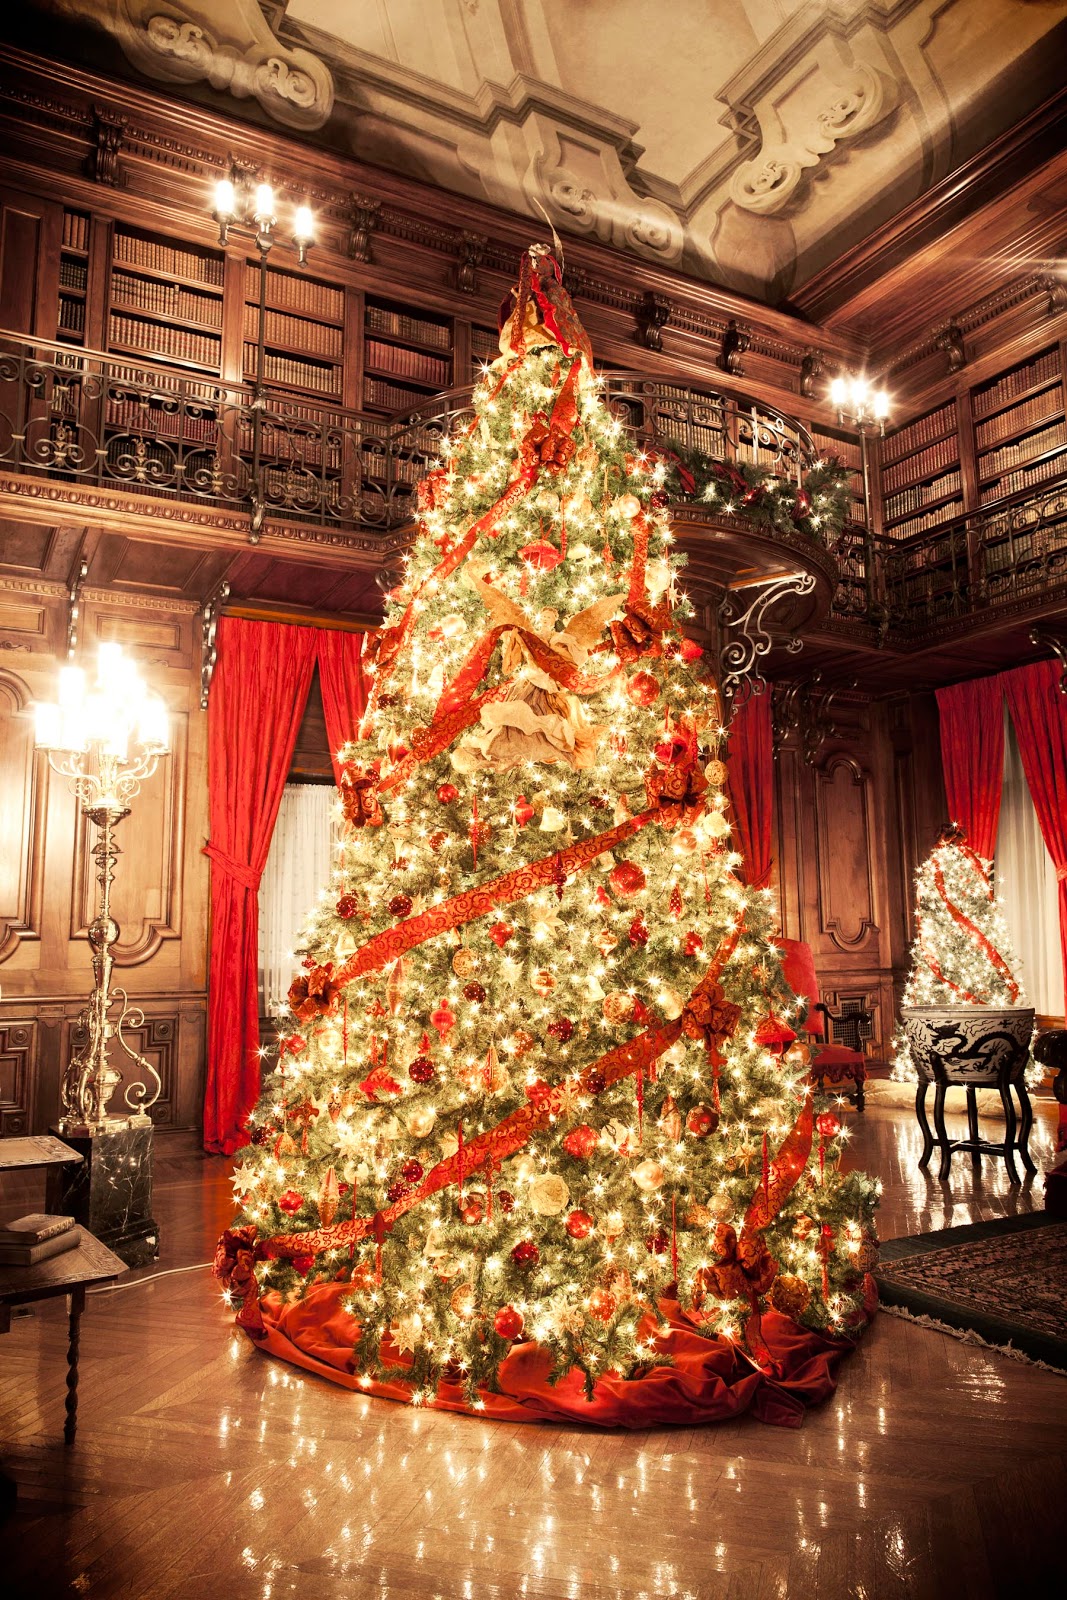 Decorating Tips From The Biltmore Estate Plus Gingerbread